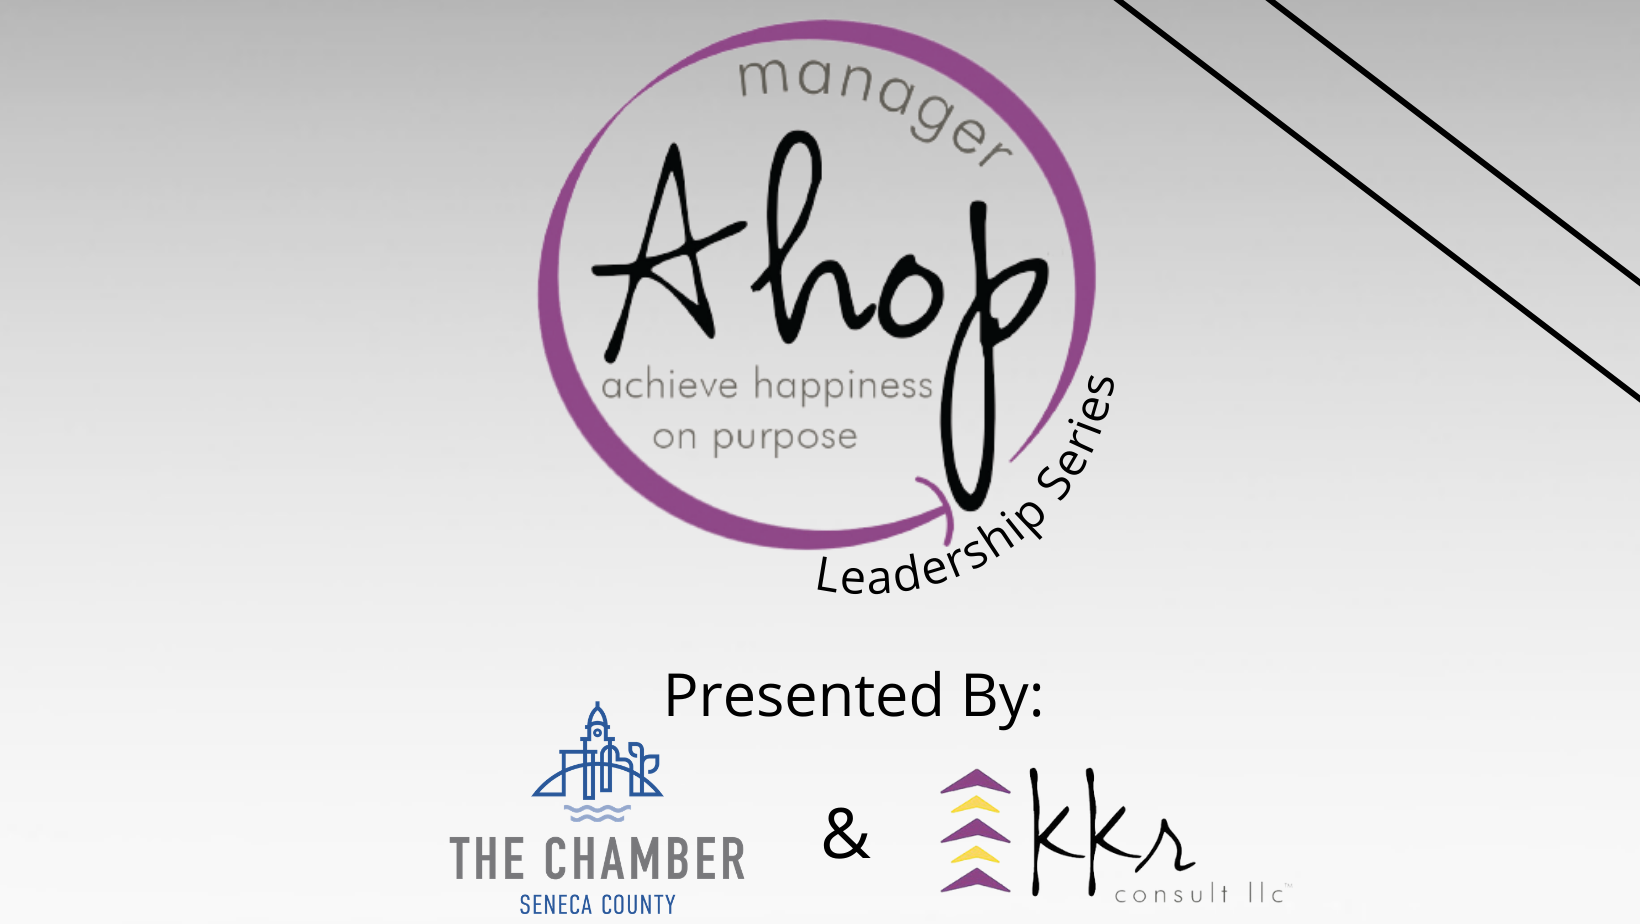 Chamber Partners with KKR Consult to Launch Manager's Leadership Series